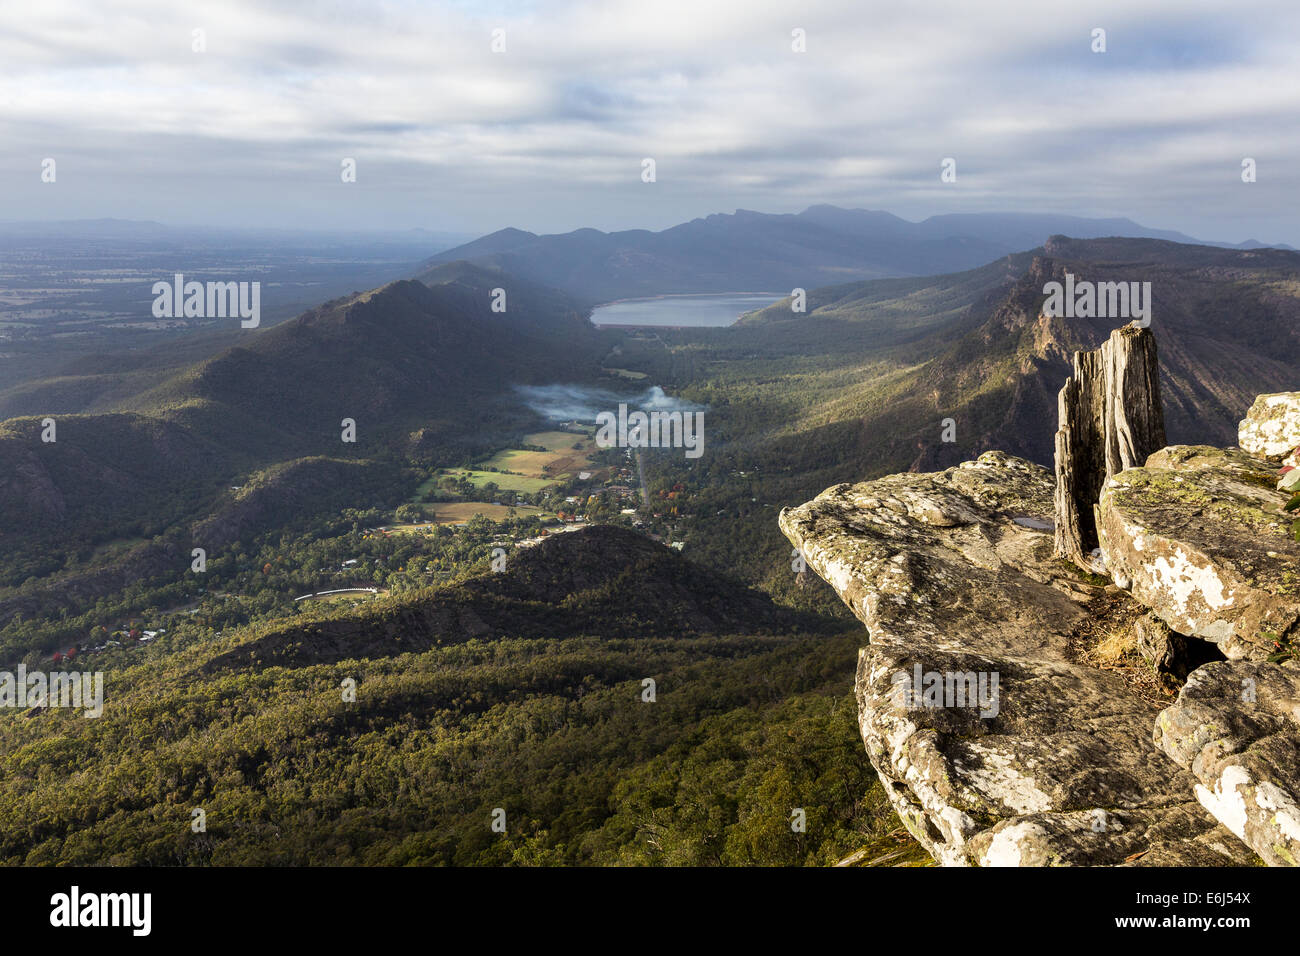 A view of Grampians National Park and Halls Gap from Baroka Lookout in Australia. Stock Photo